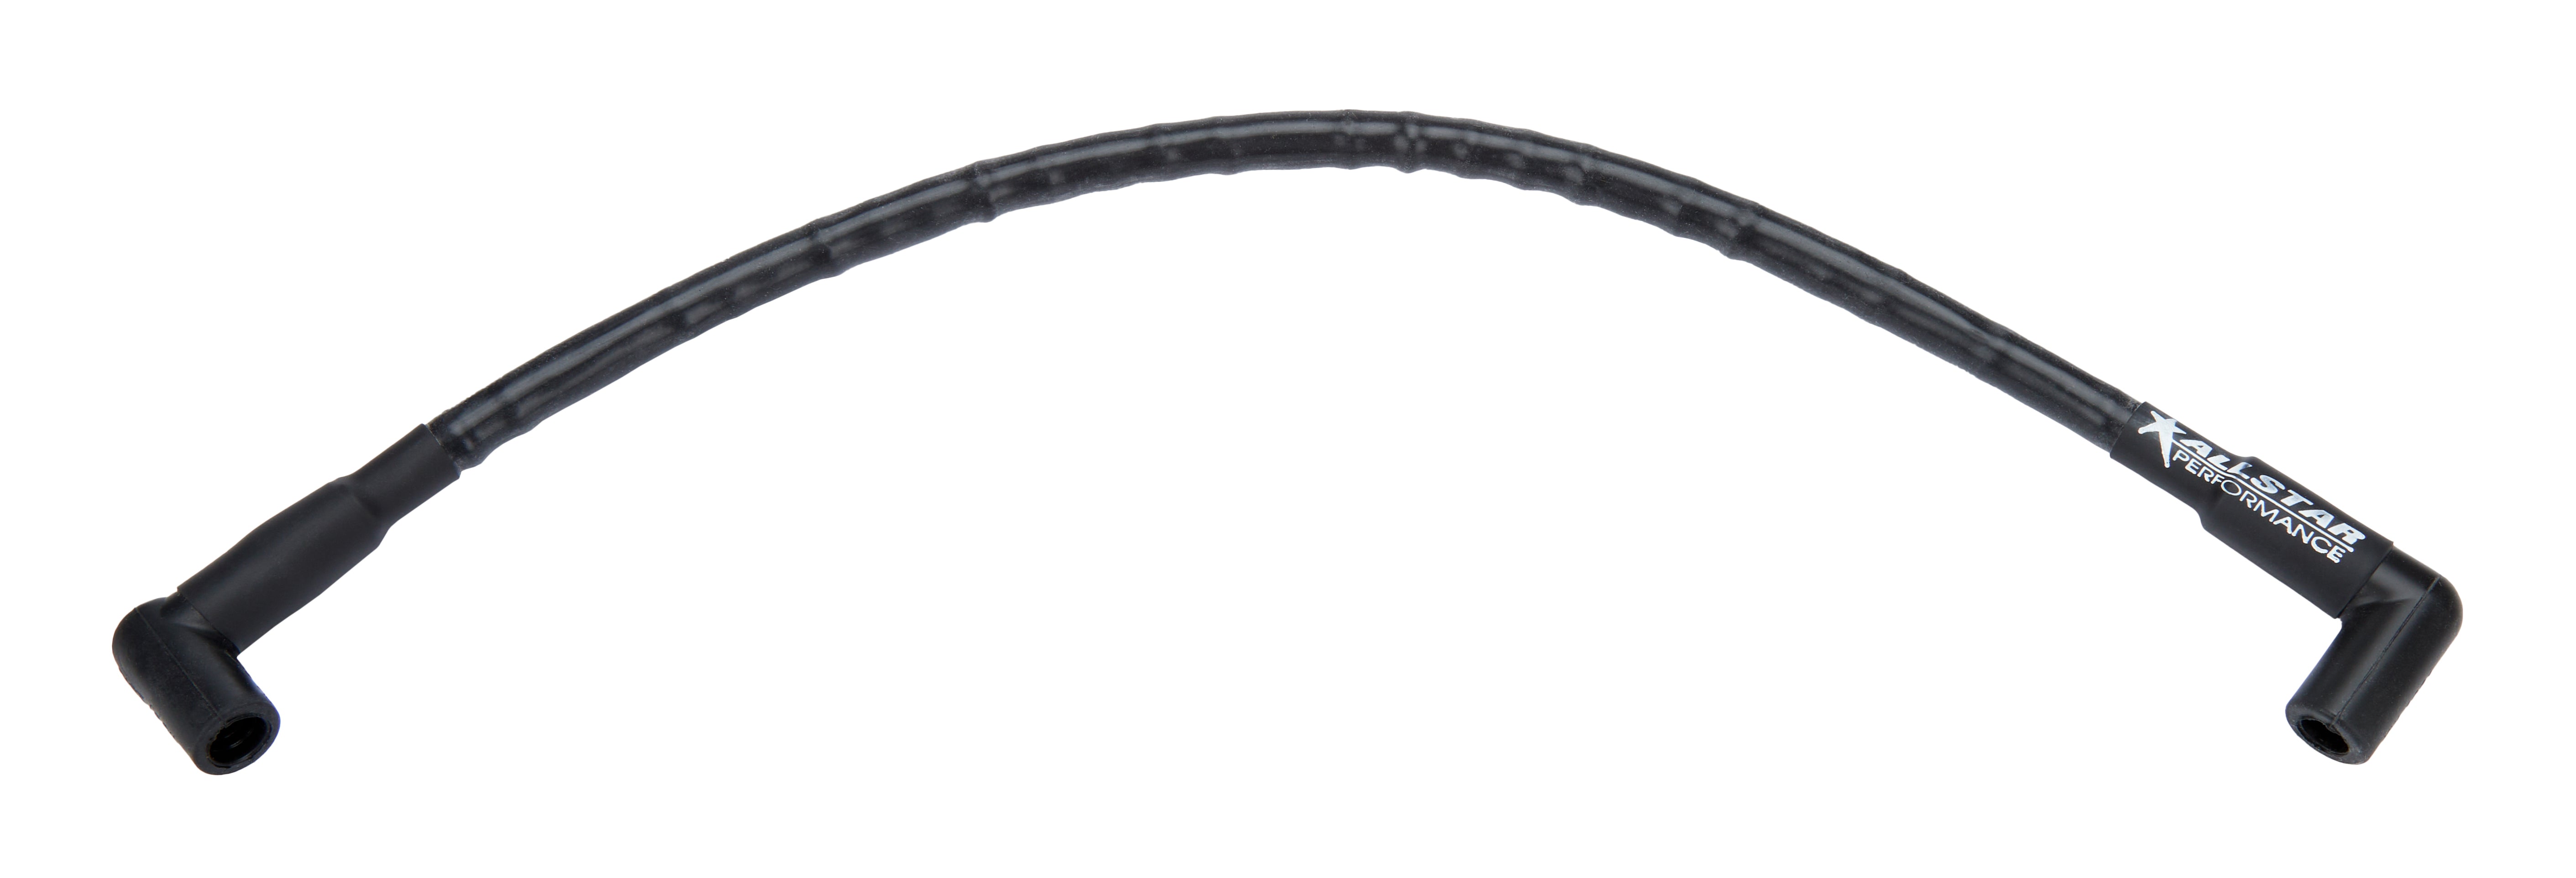 Allstar Performance Coil Wire w/ Sleeving 18in Ignition Components Ignition Coil Wires main image